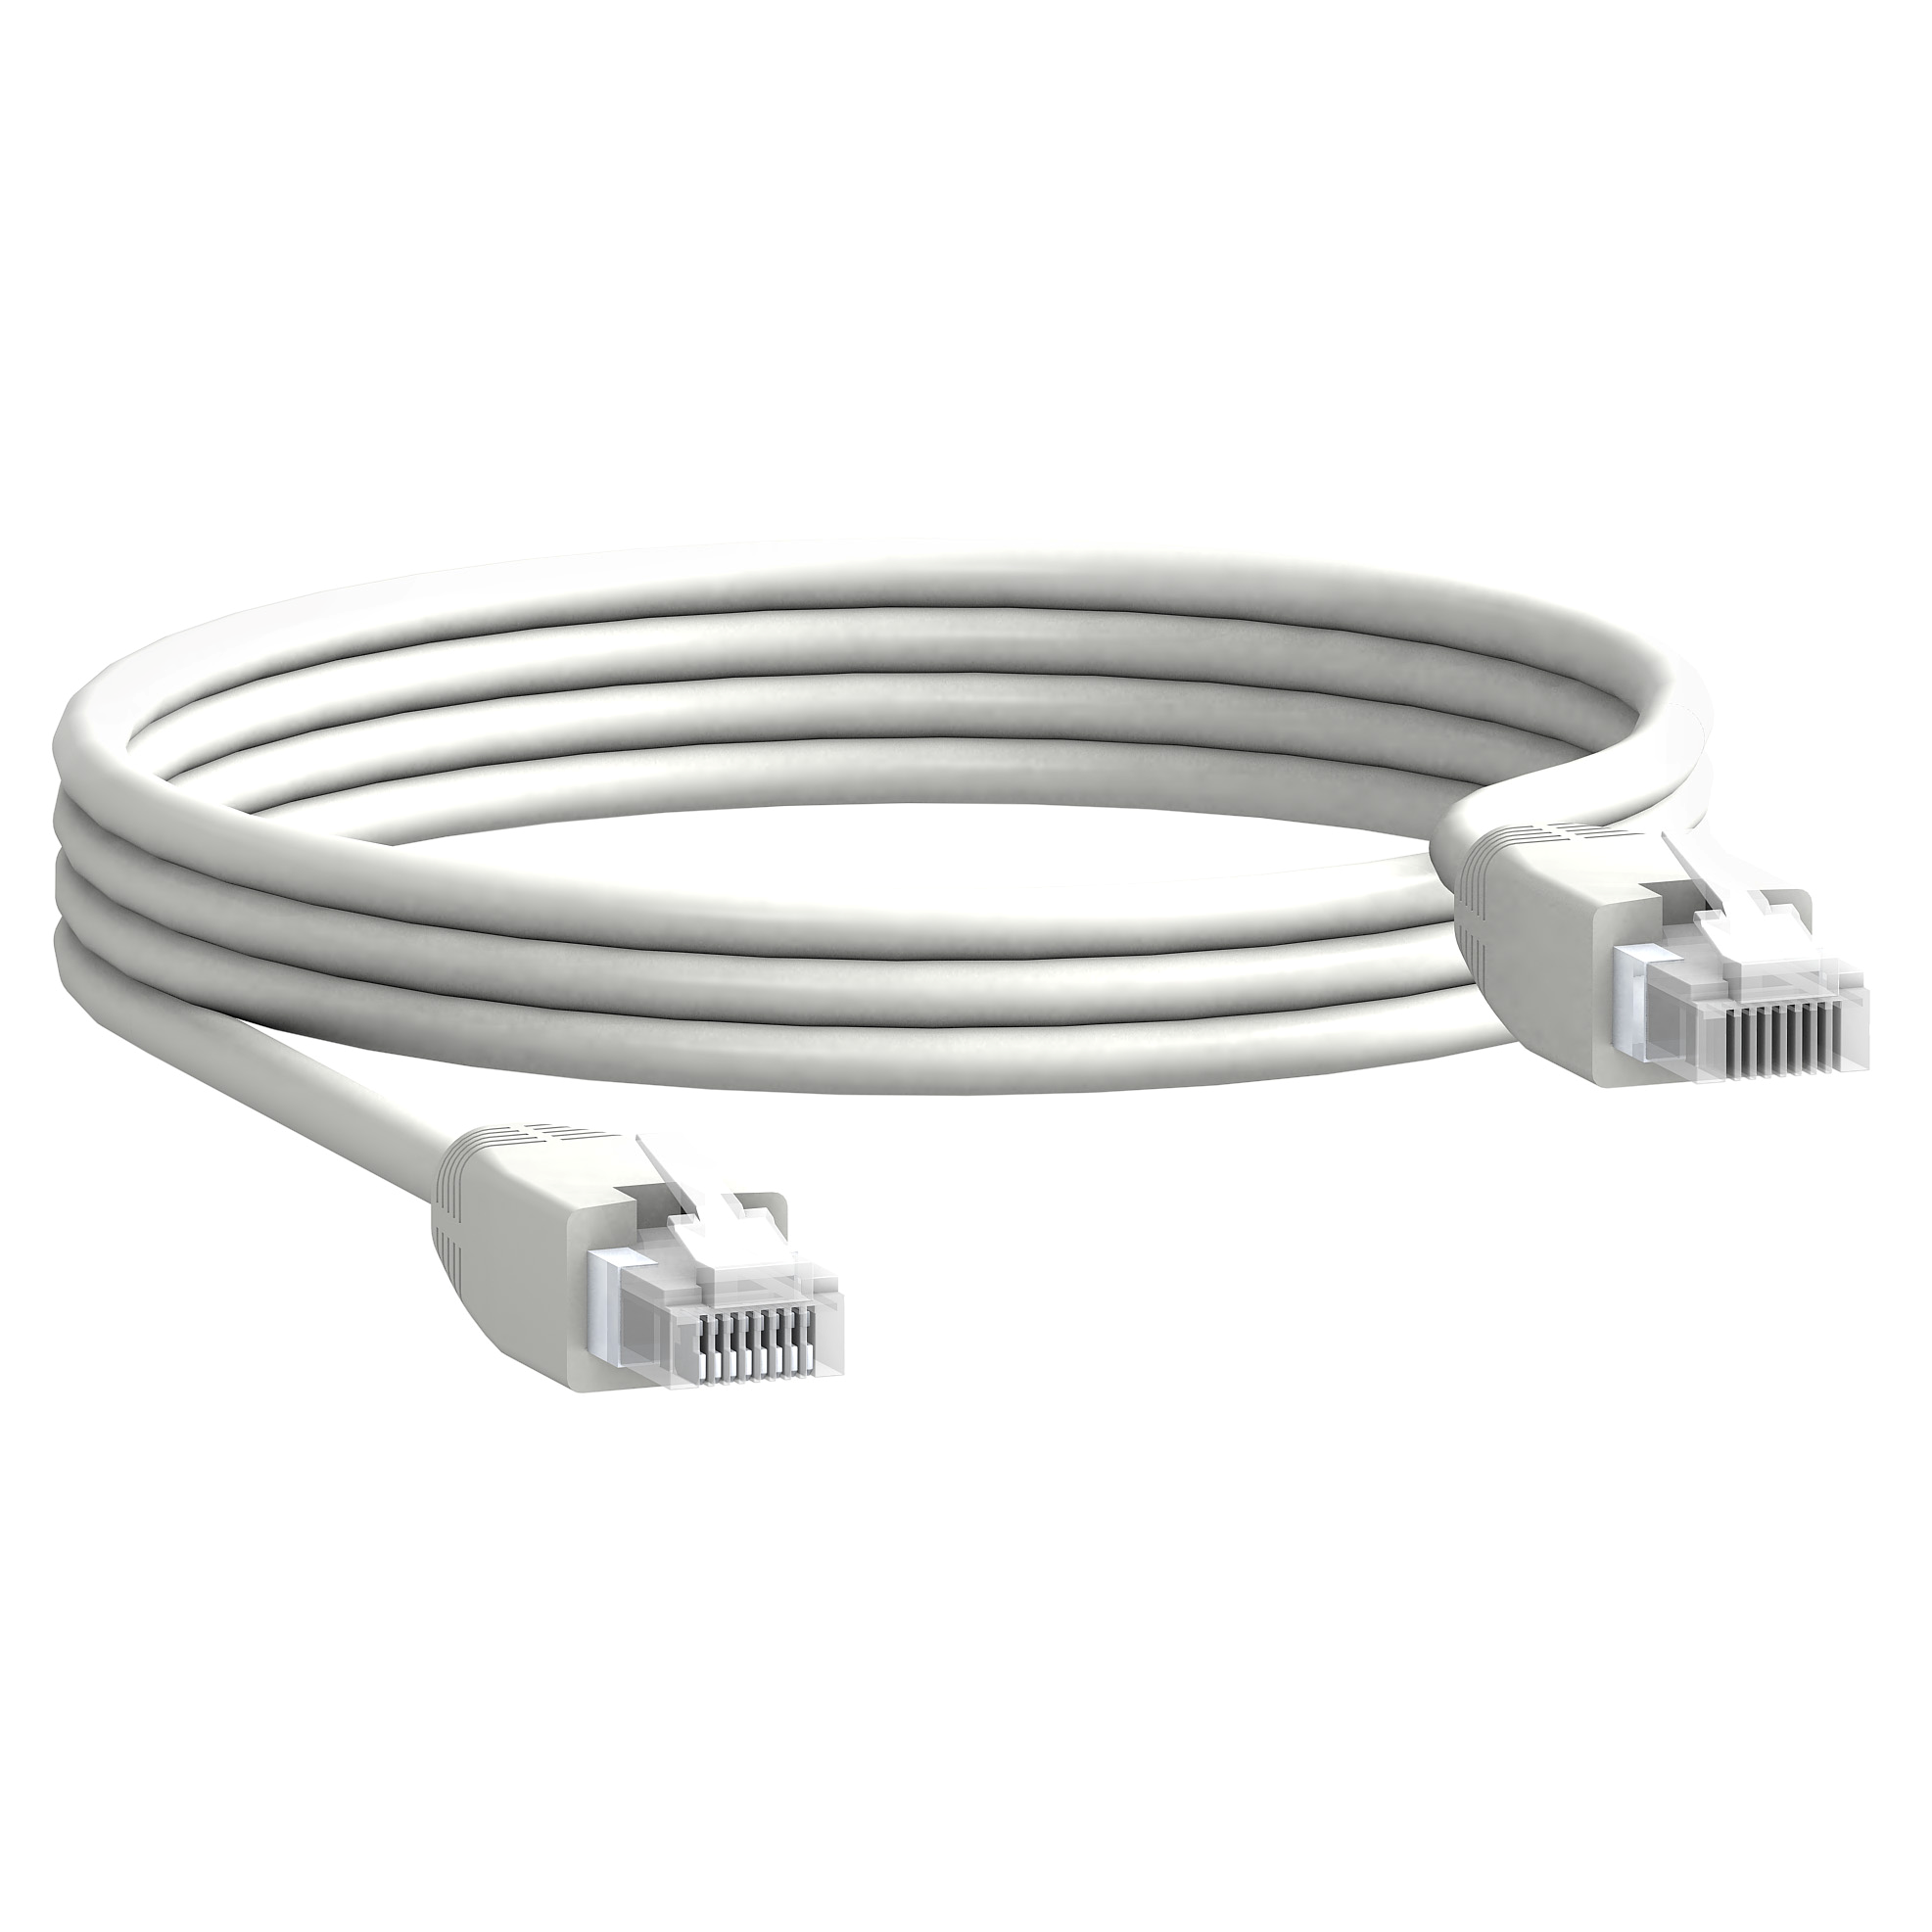 Schneider Electric Ethernet Cable, RJ45 to RJ45, 600mm